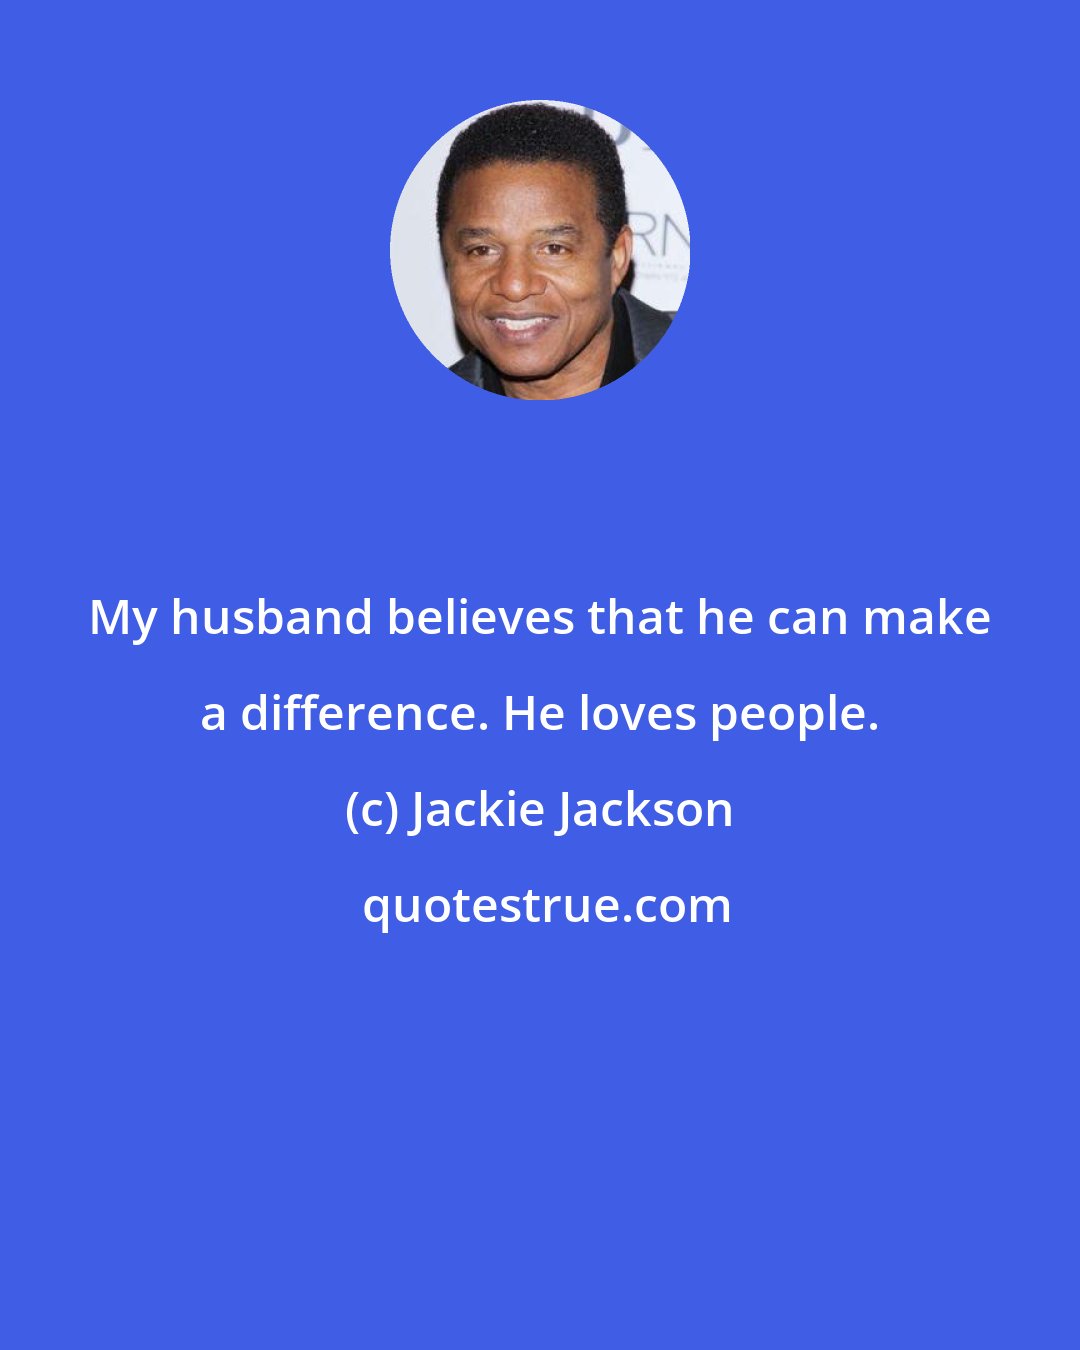 Jackie Jackson: My husband believes that he can make a difference. He loves people.